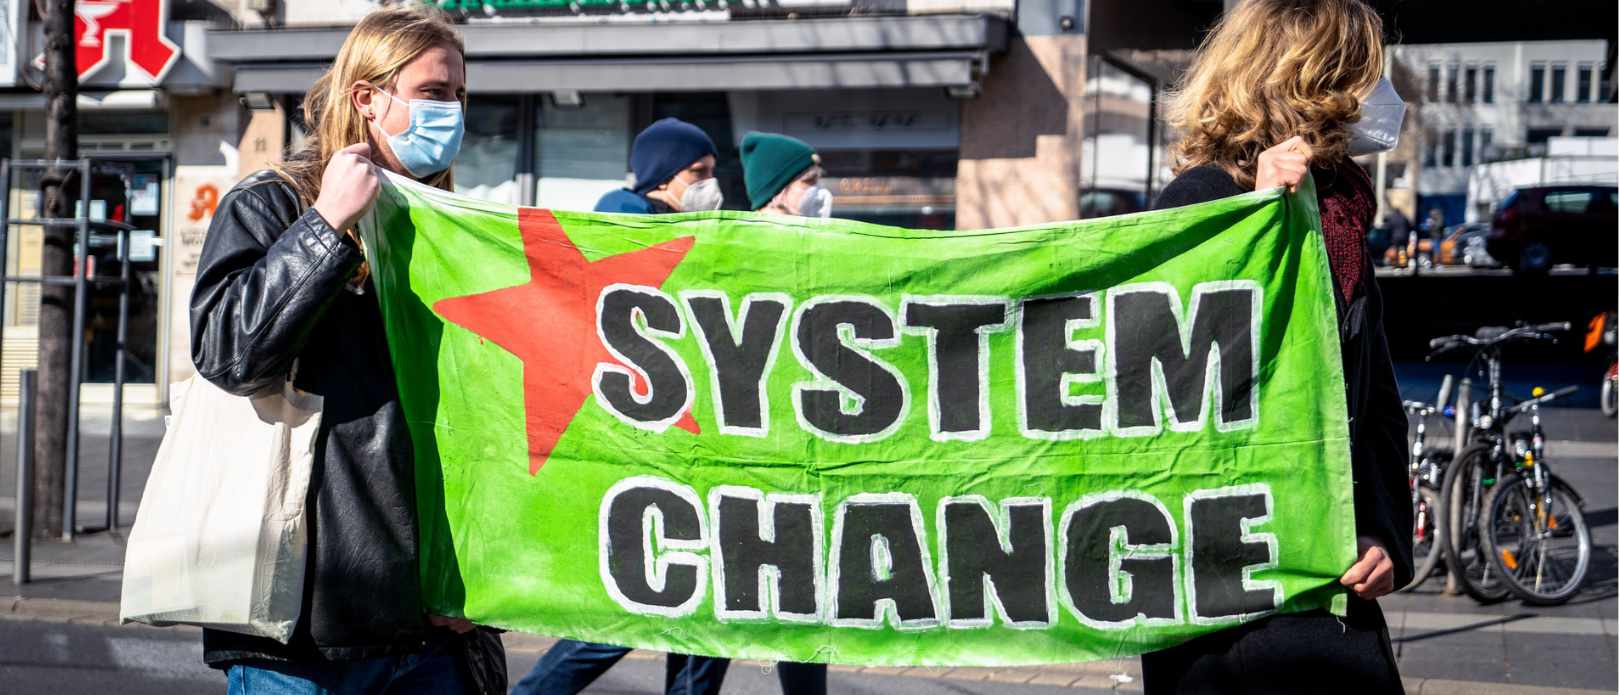 Two women holding a sign saying "System change"